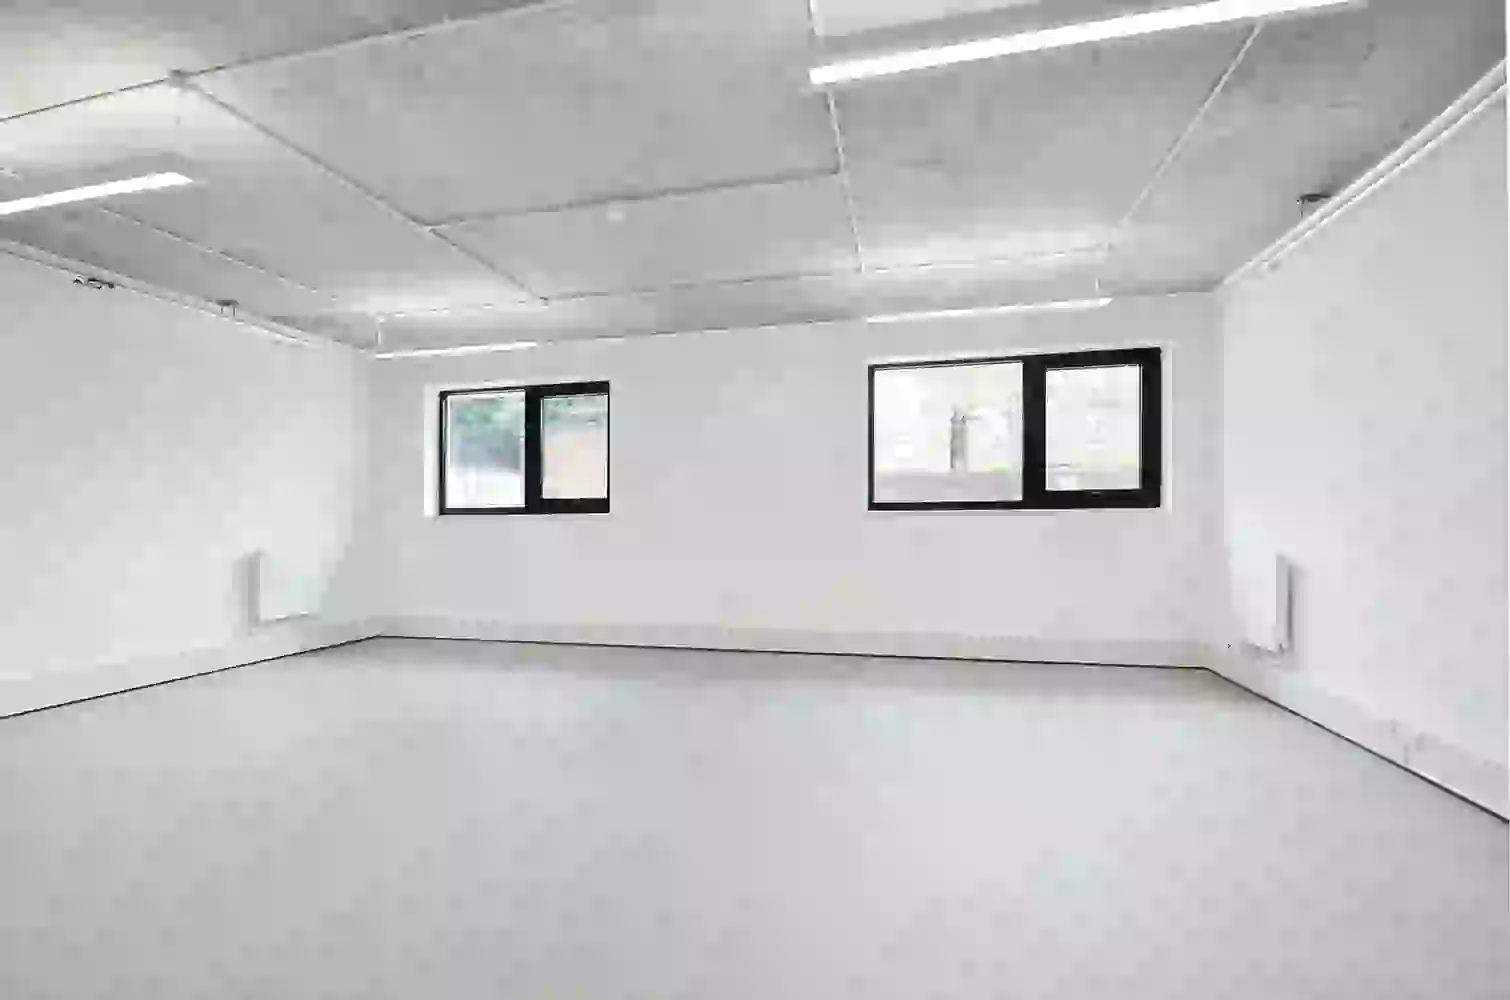 Office space to rent at ScreenWorks, 22 Highbury Grove, Islington, London, unit SW.G09, 622 sq ft (57 sq m).